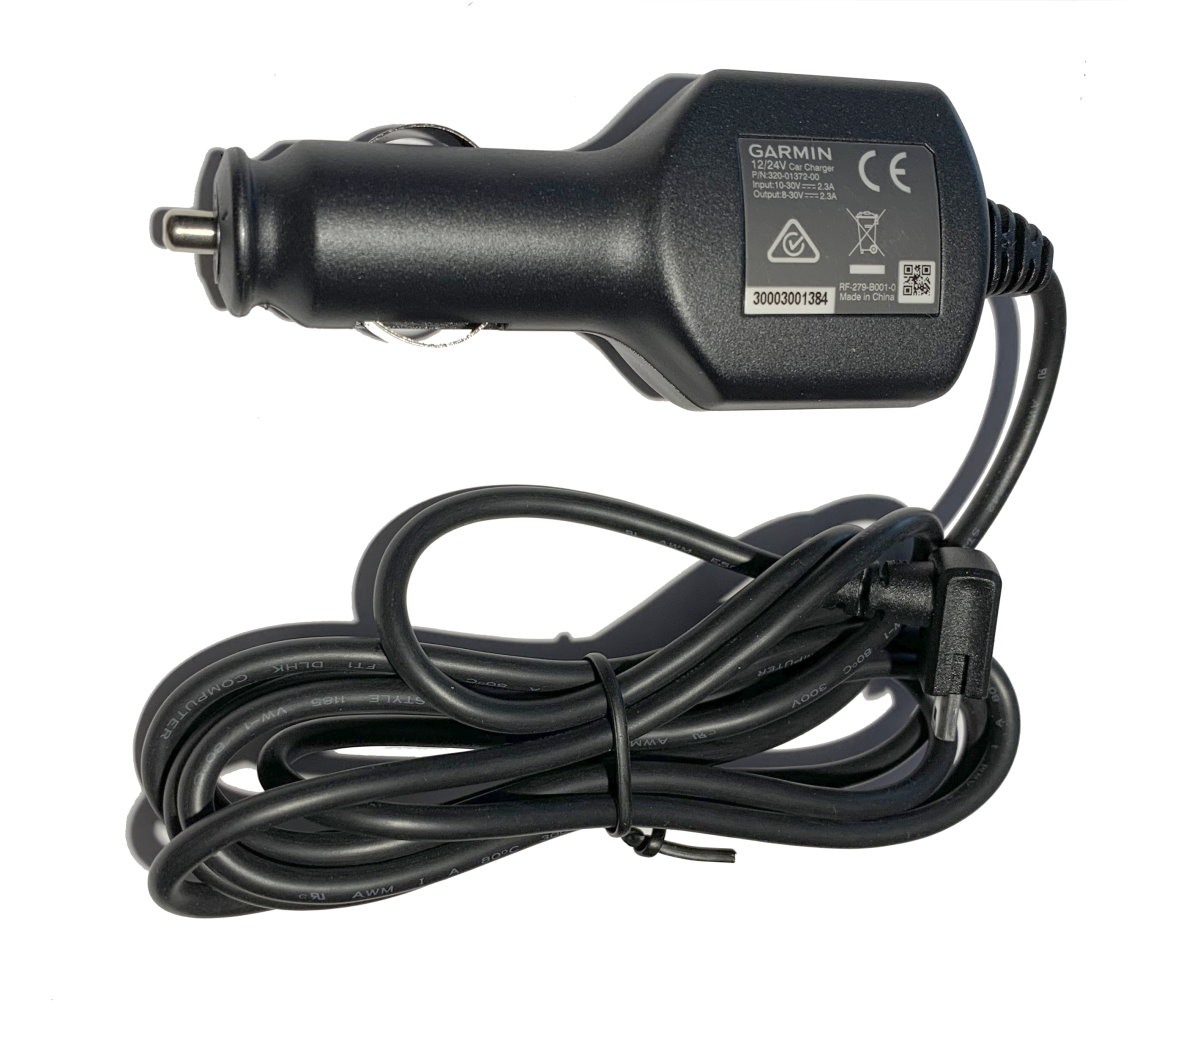 Car Charger Power Cord for Garmin nuvi 750 750t 755t 760 770 785t 850 885 GPS 